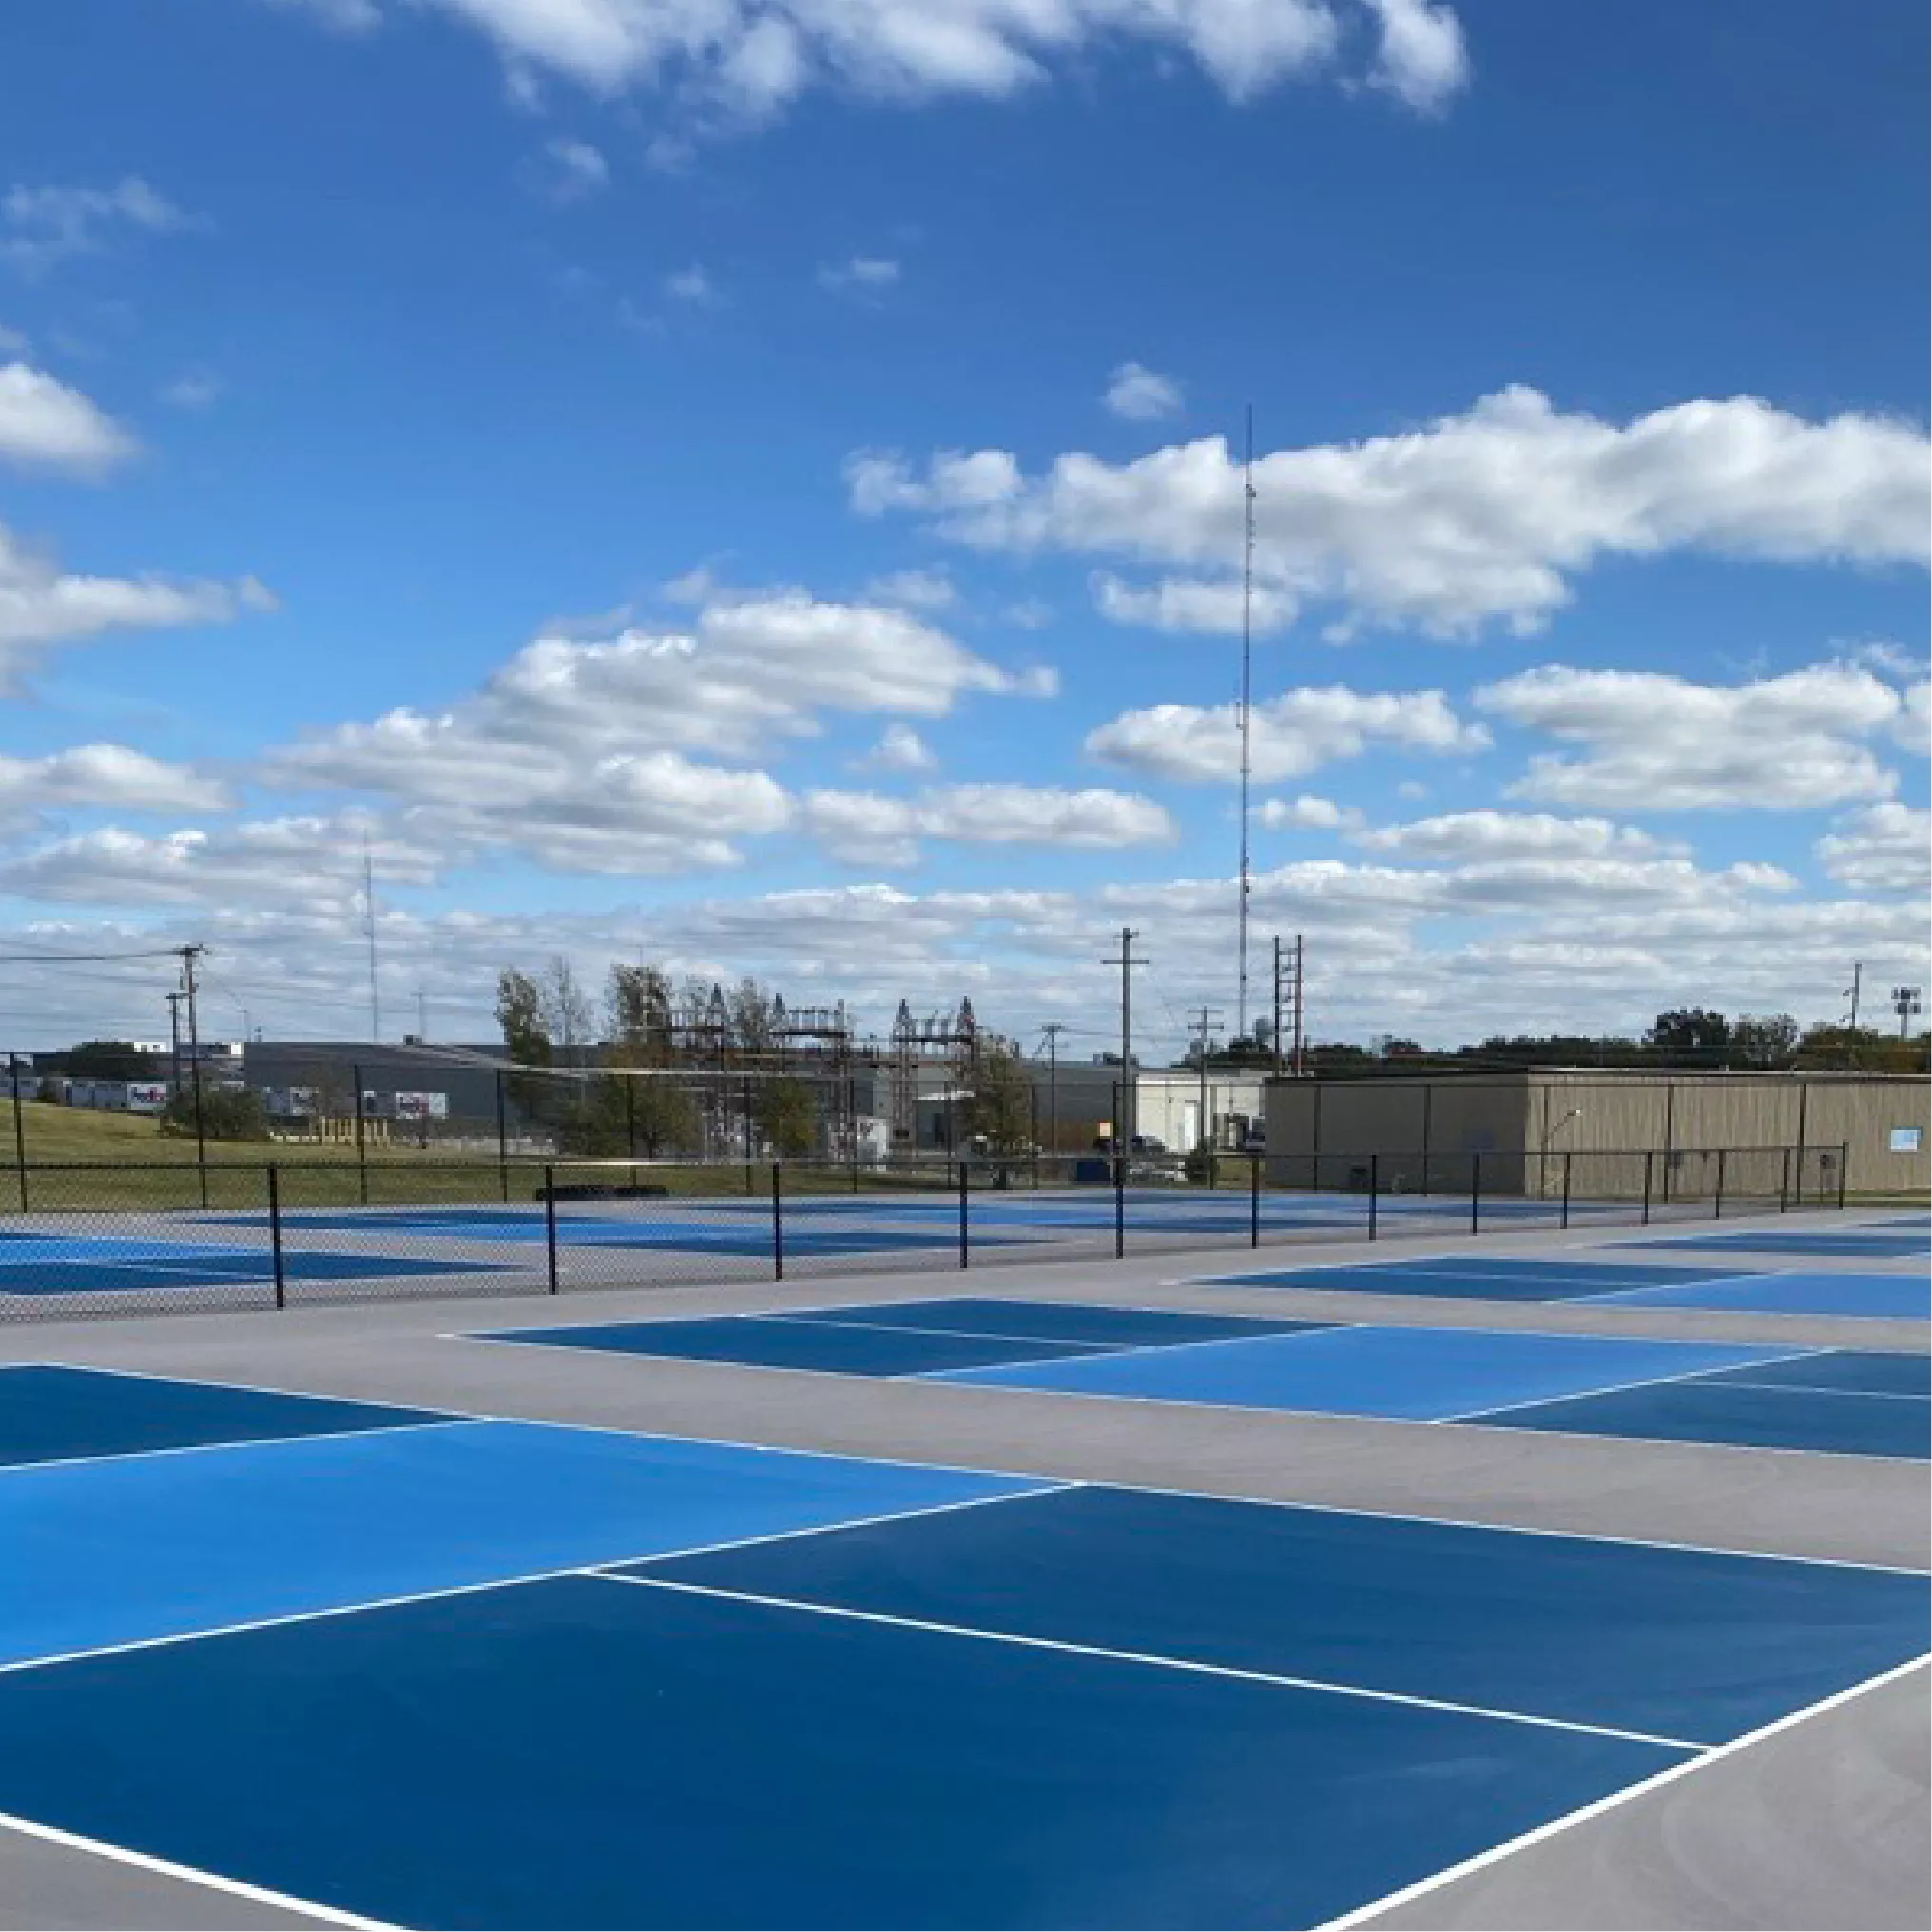 Outdoor Pickleball Courts at the North Lexington YMCA